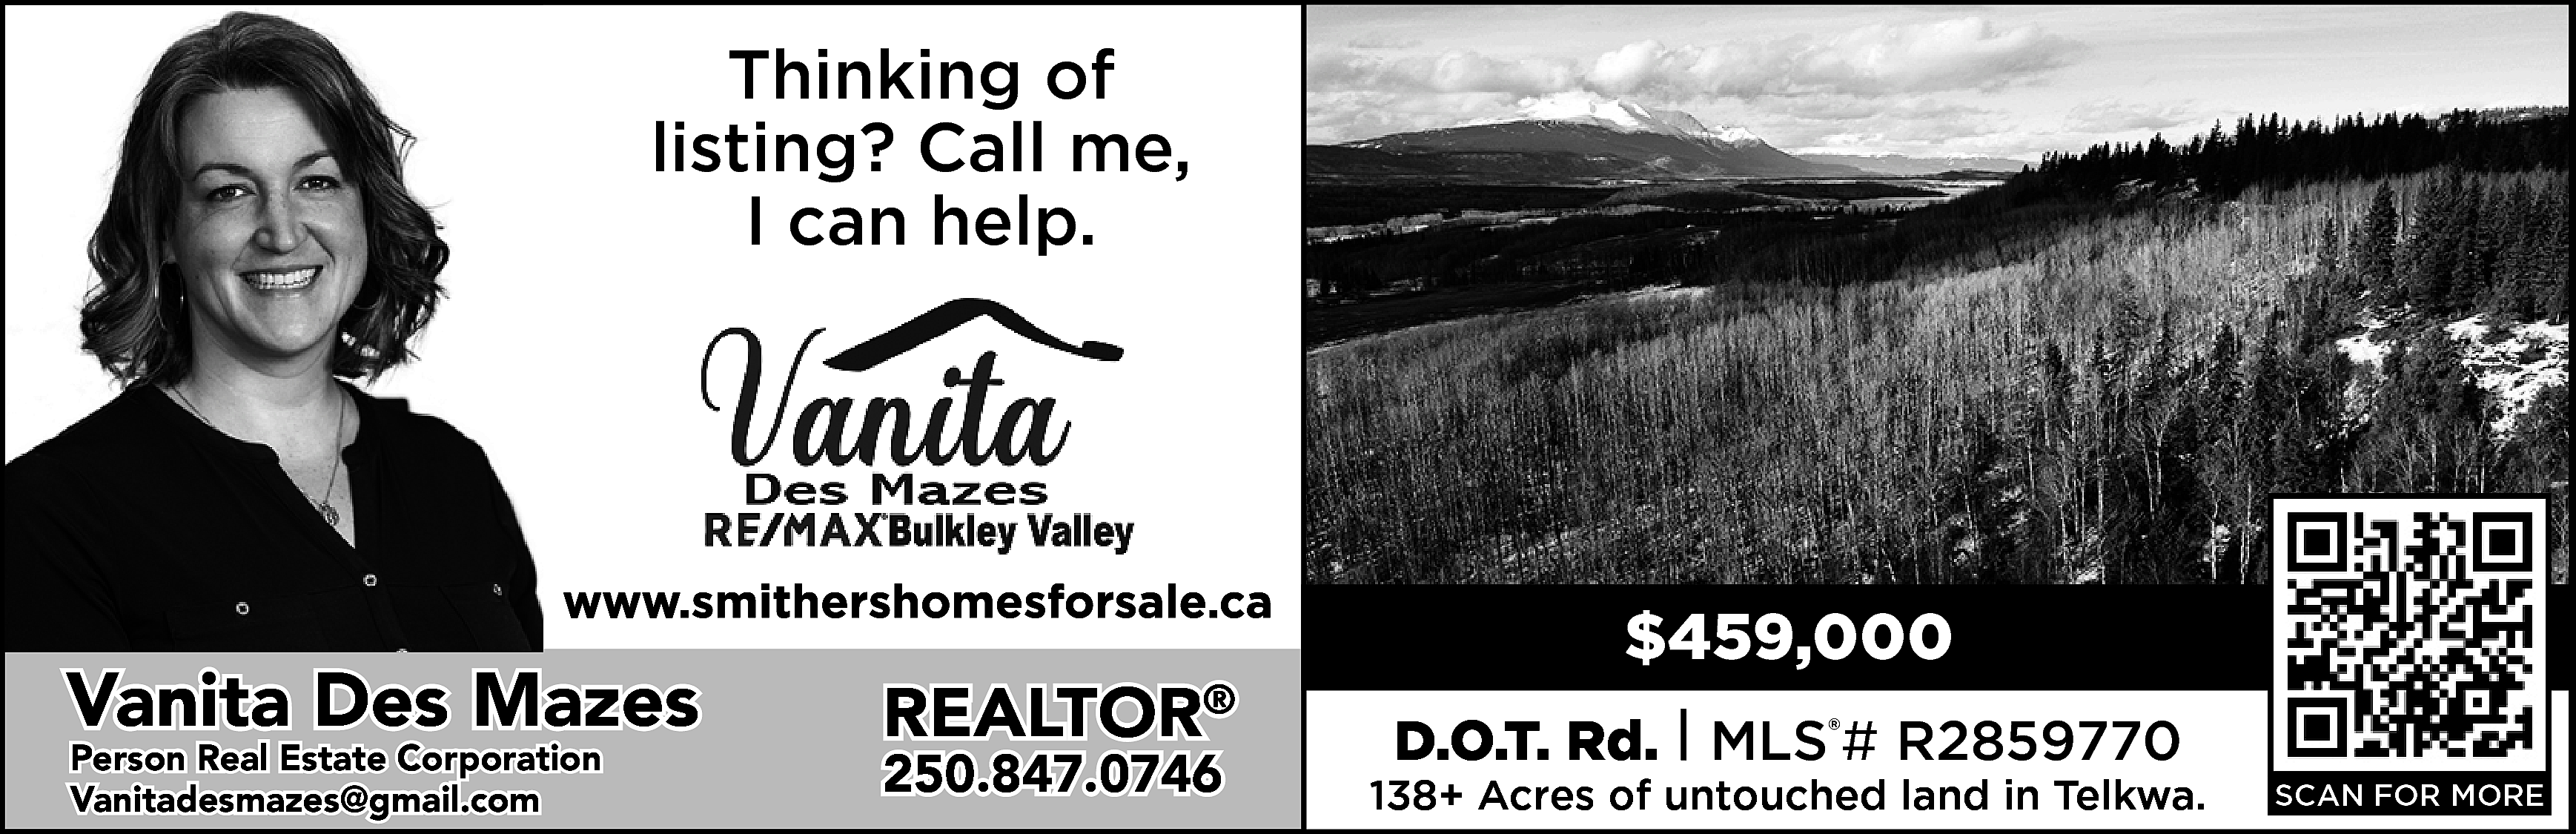 Thinking of <br>listing? Call me,  Thinking of  listing? Call me,  I can help.    https://www.smithershomesforsale.ca/    Vanita Des Mazes  Person Real Estate Corporation  vanitadesmazes@gmail.com  Vanitadesmazes@gmail.com    REALTOR    ®    250.847.0746    $459,000  D.O.T. Rd. | MLS®# R2859770    138+ Acres of untouched land in Telkwa.    SCAN FOR MORE    